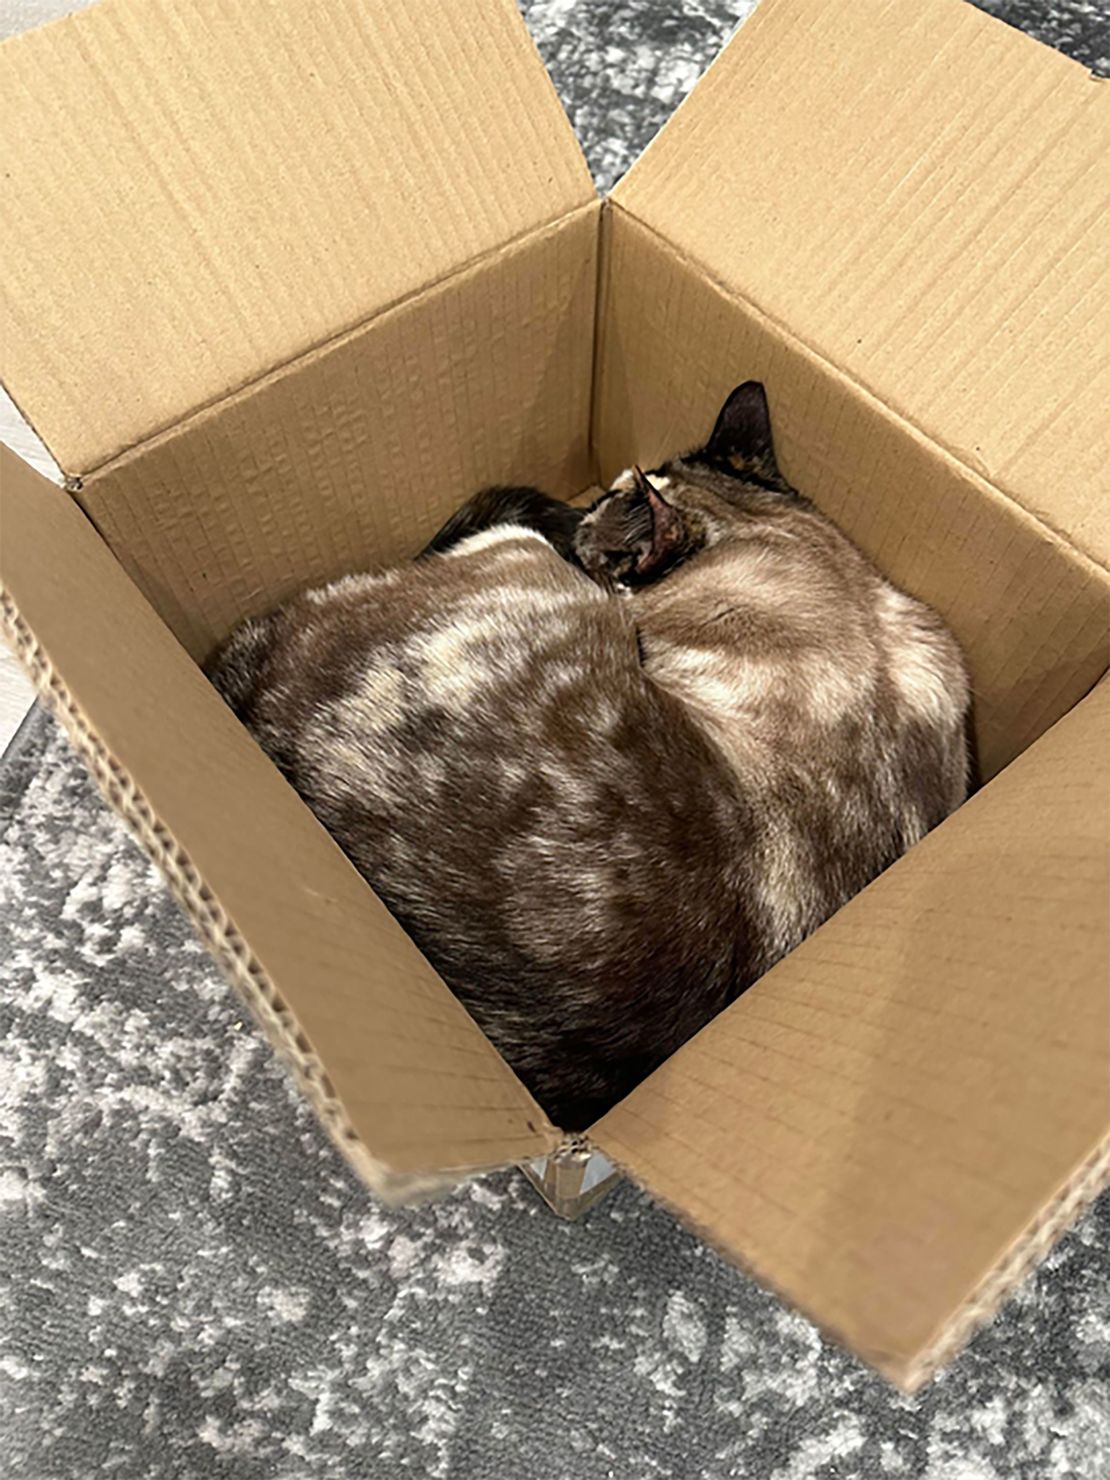 Galena curls up in a box in an undated photo; it's not the box she was shipped in.